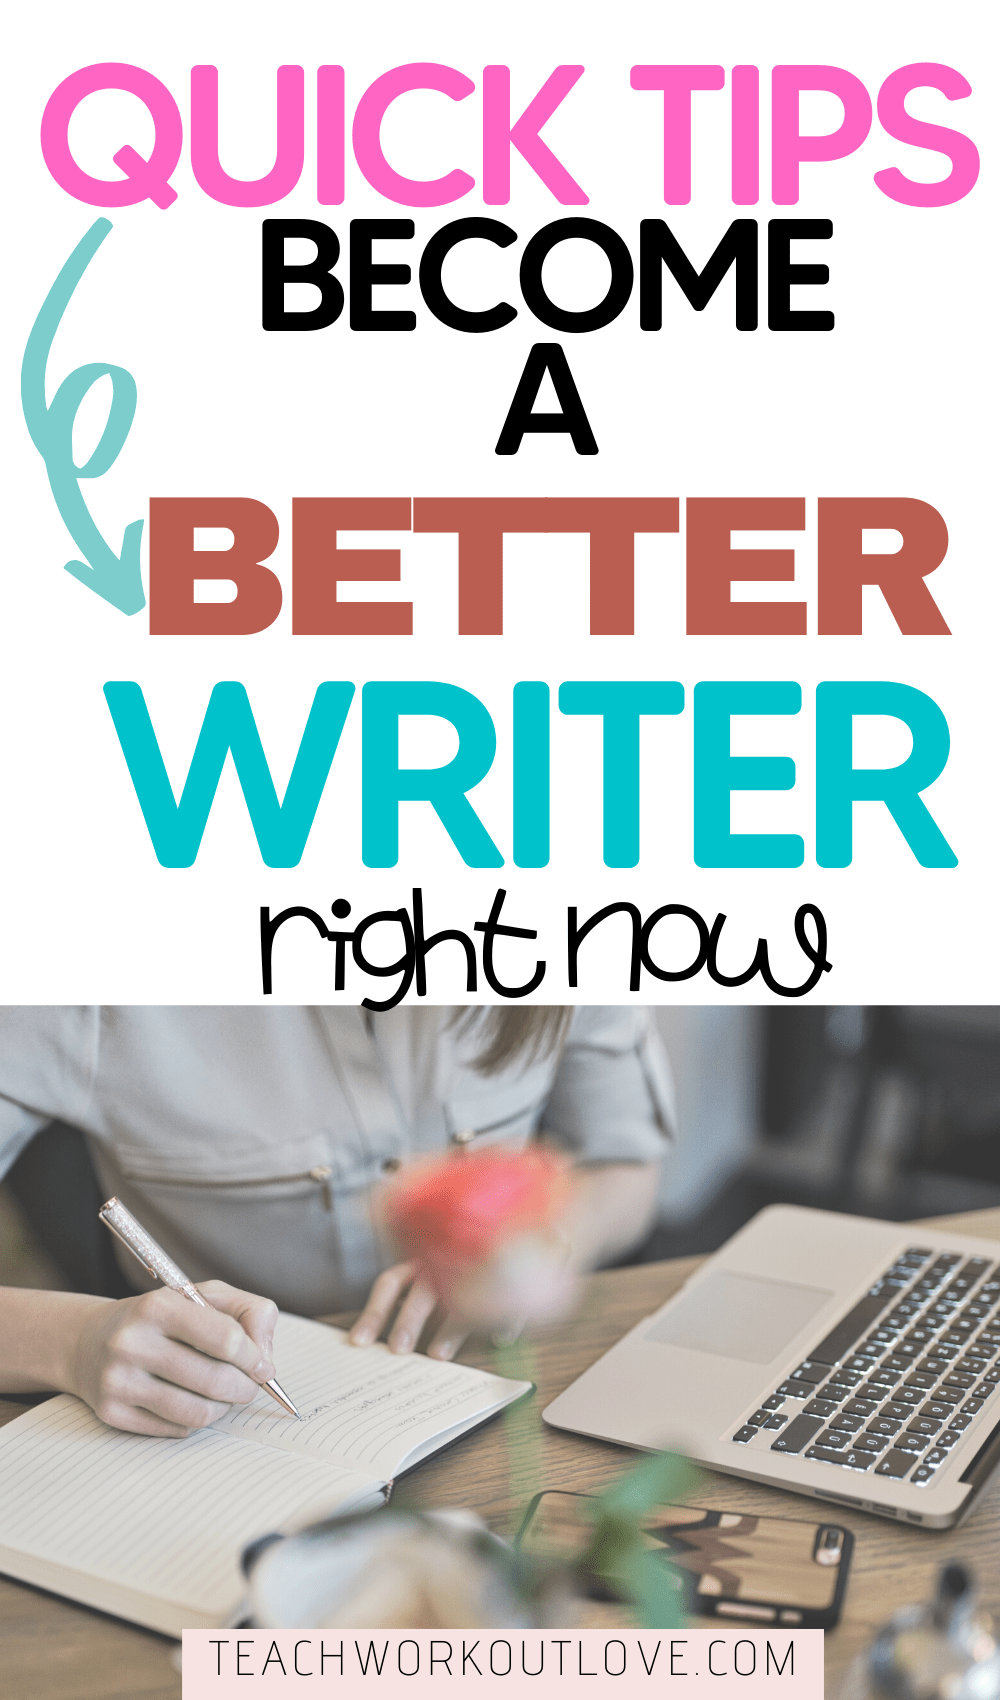 Whether you’re a blogger, journalist, or an aspiring author, being a great writer takes work. We have some quick tips to becoming a better writer now!